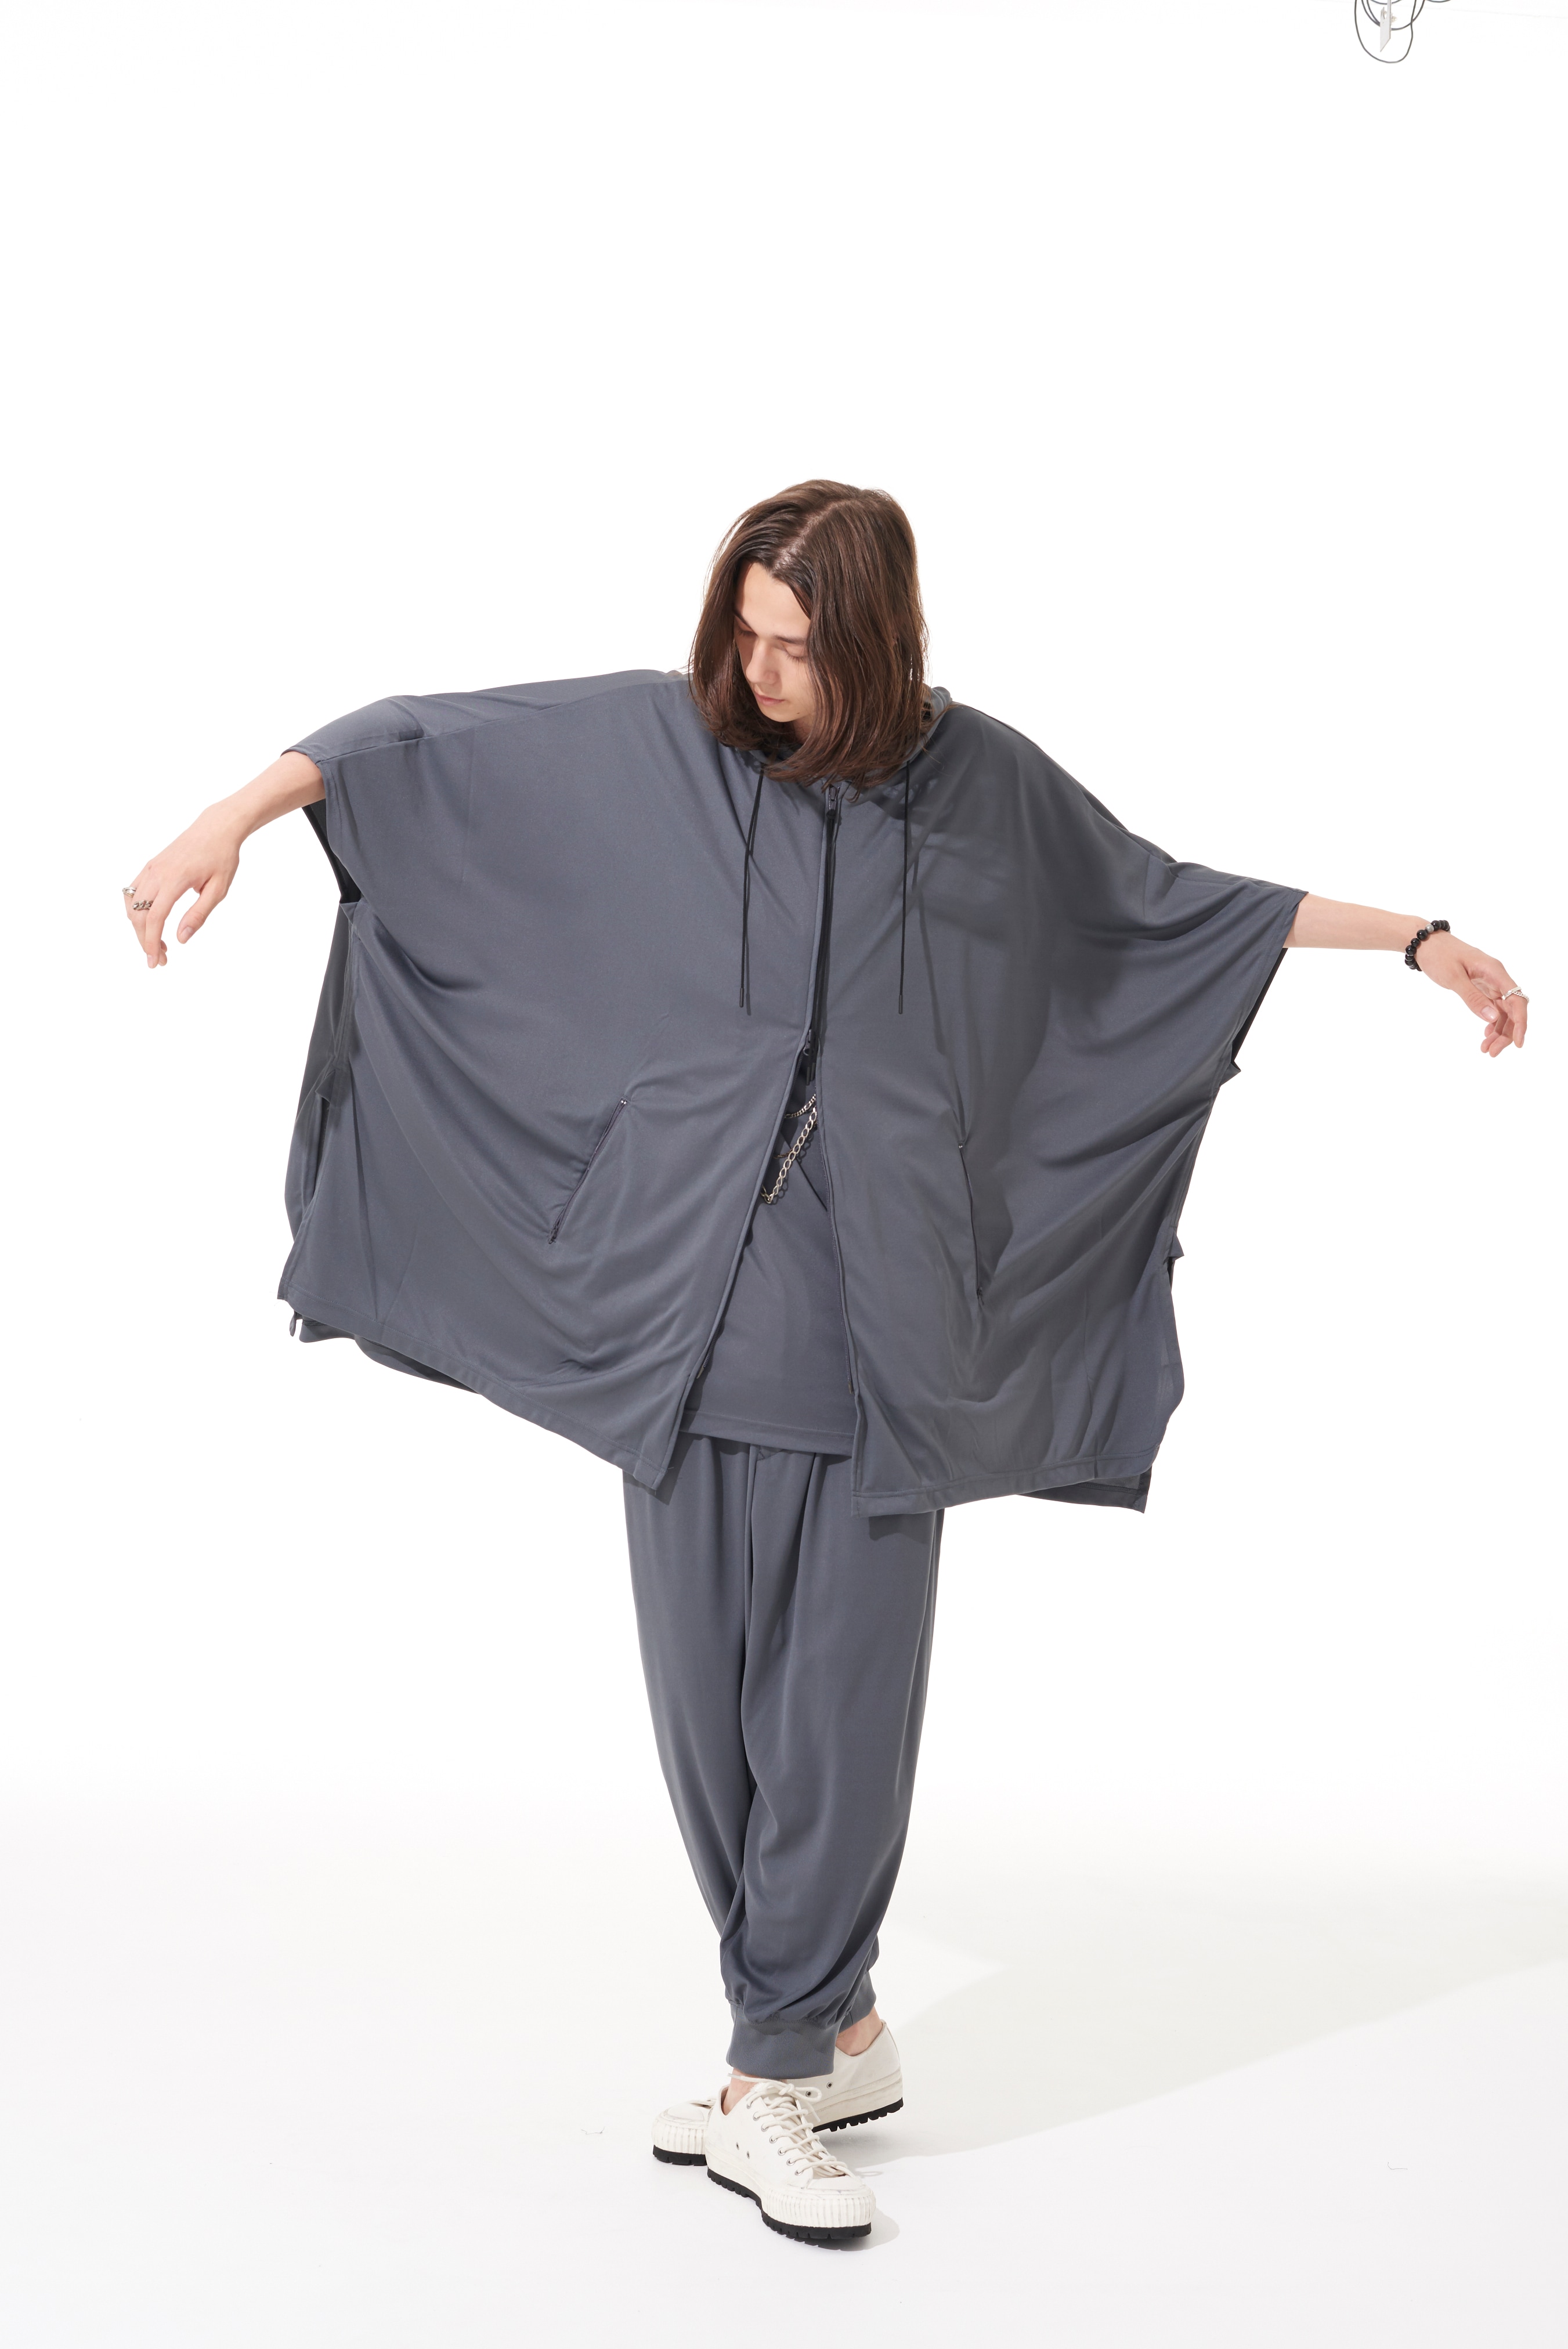 HIGH-GAUGE POLYESTER SMOOTH JERSEY HOODIE PONCHO(M Gray): S'YTE 